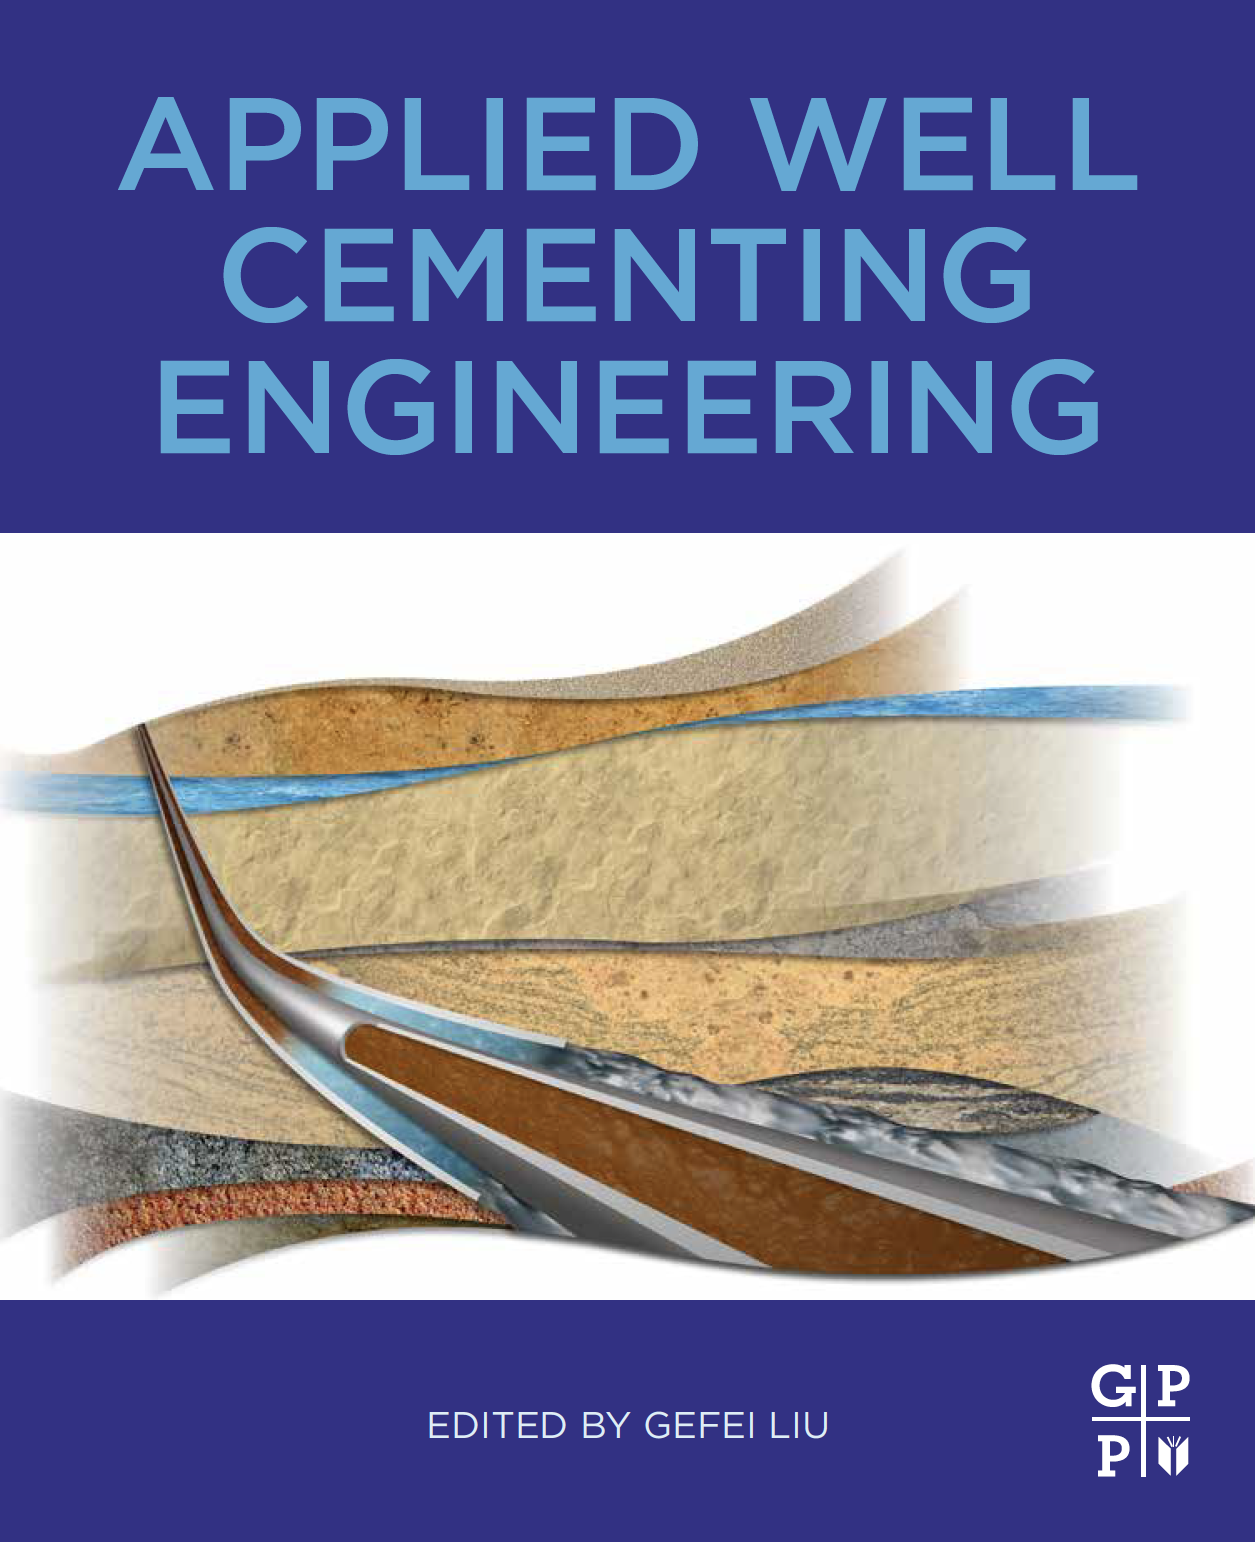 Applied Well Cementing Engineering | PVI Well Cementing Books